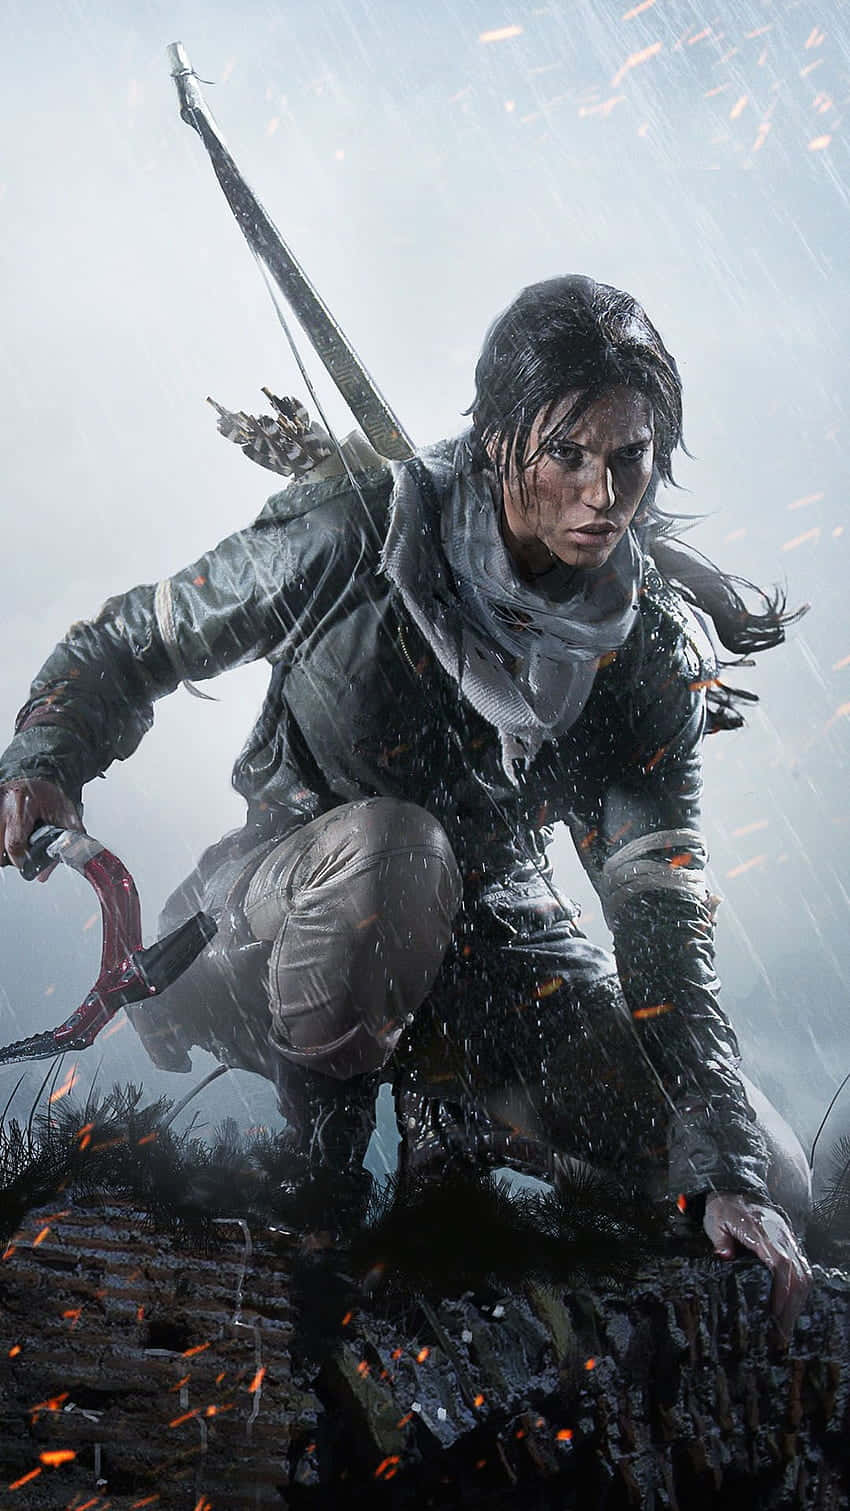 Conquer unknown lands with Iphone Xs and Rise Of The Tomb Raider